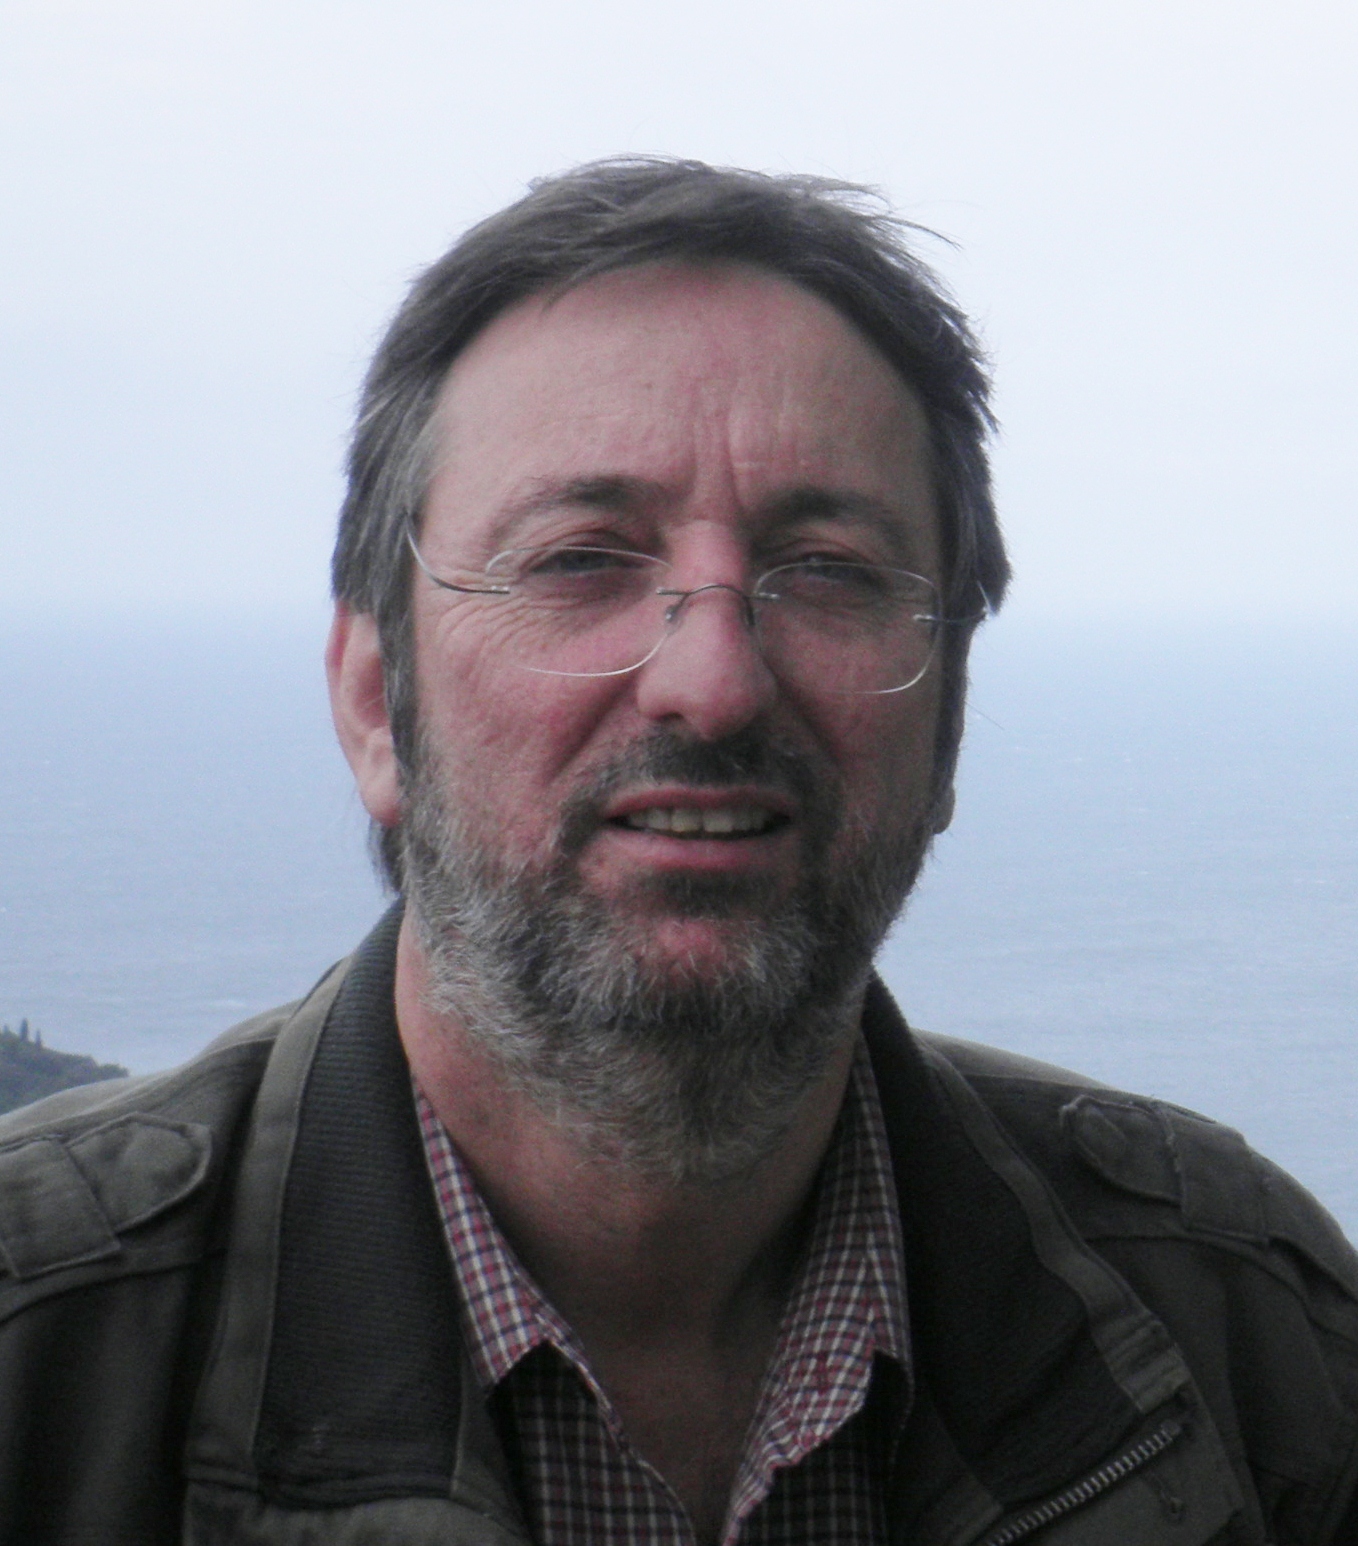 A photograph of David O'Brien, a man who has a short salt-and-pepper beard and wears glasses.